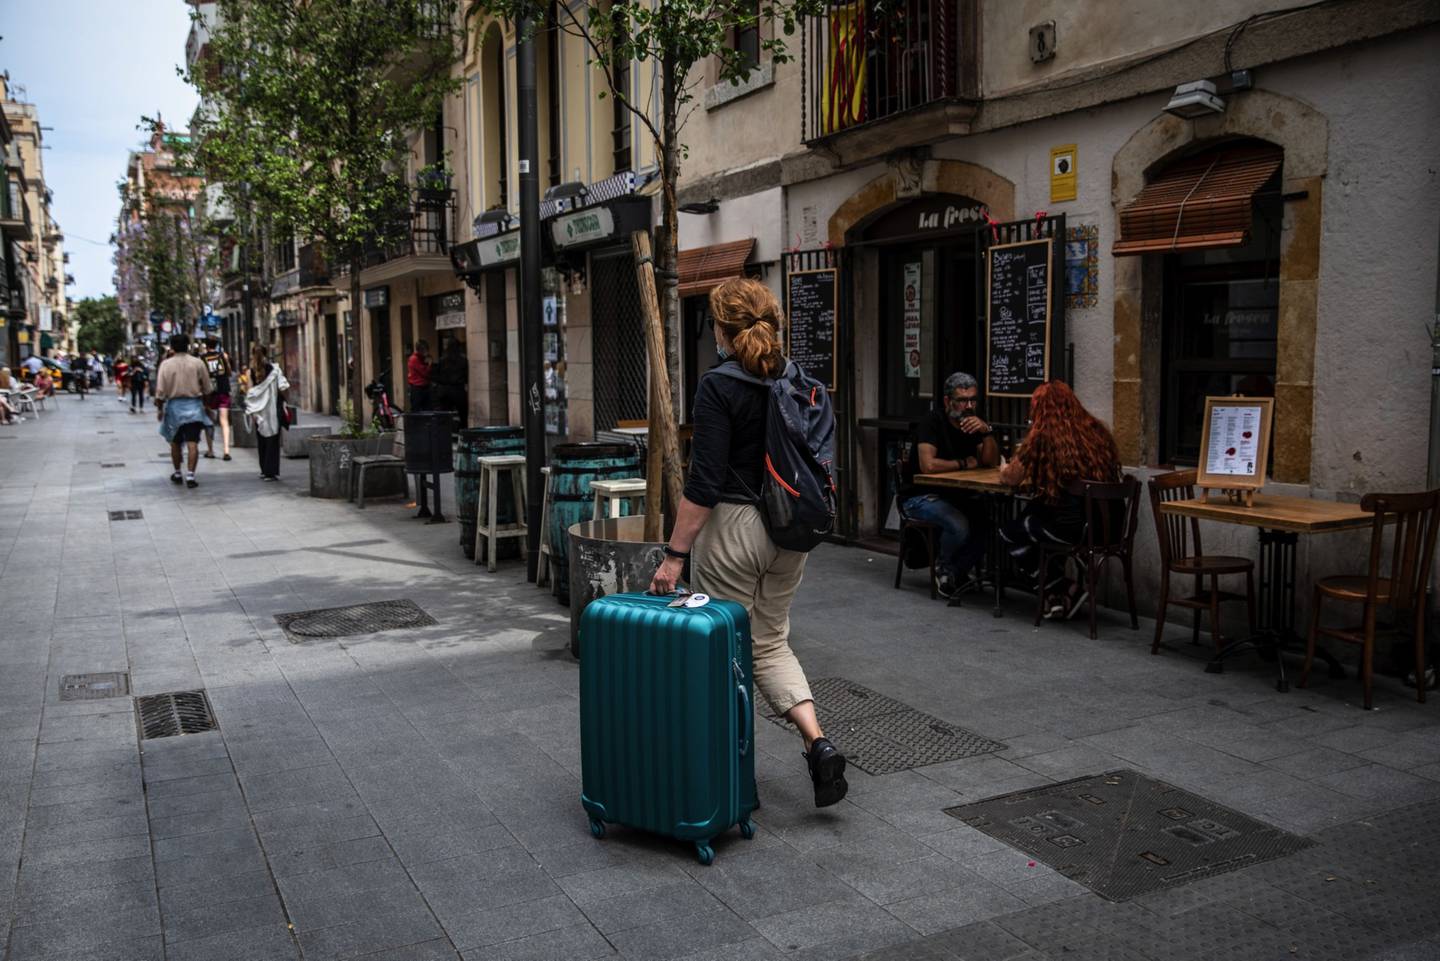 Barcelona has designed a network of bus stops to help spread visitors more evenly around the city. Officials have also frozen licenses on short-term rentals. Photographer: Angel Garcia/Bloombergdfd